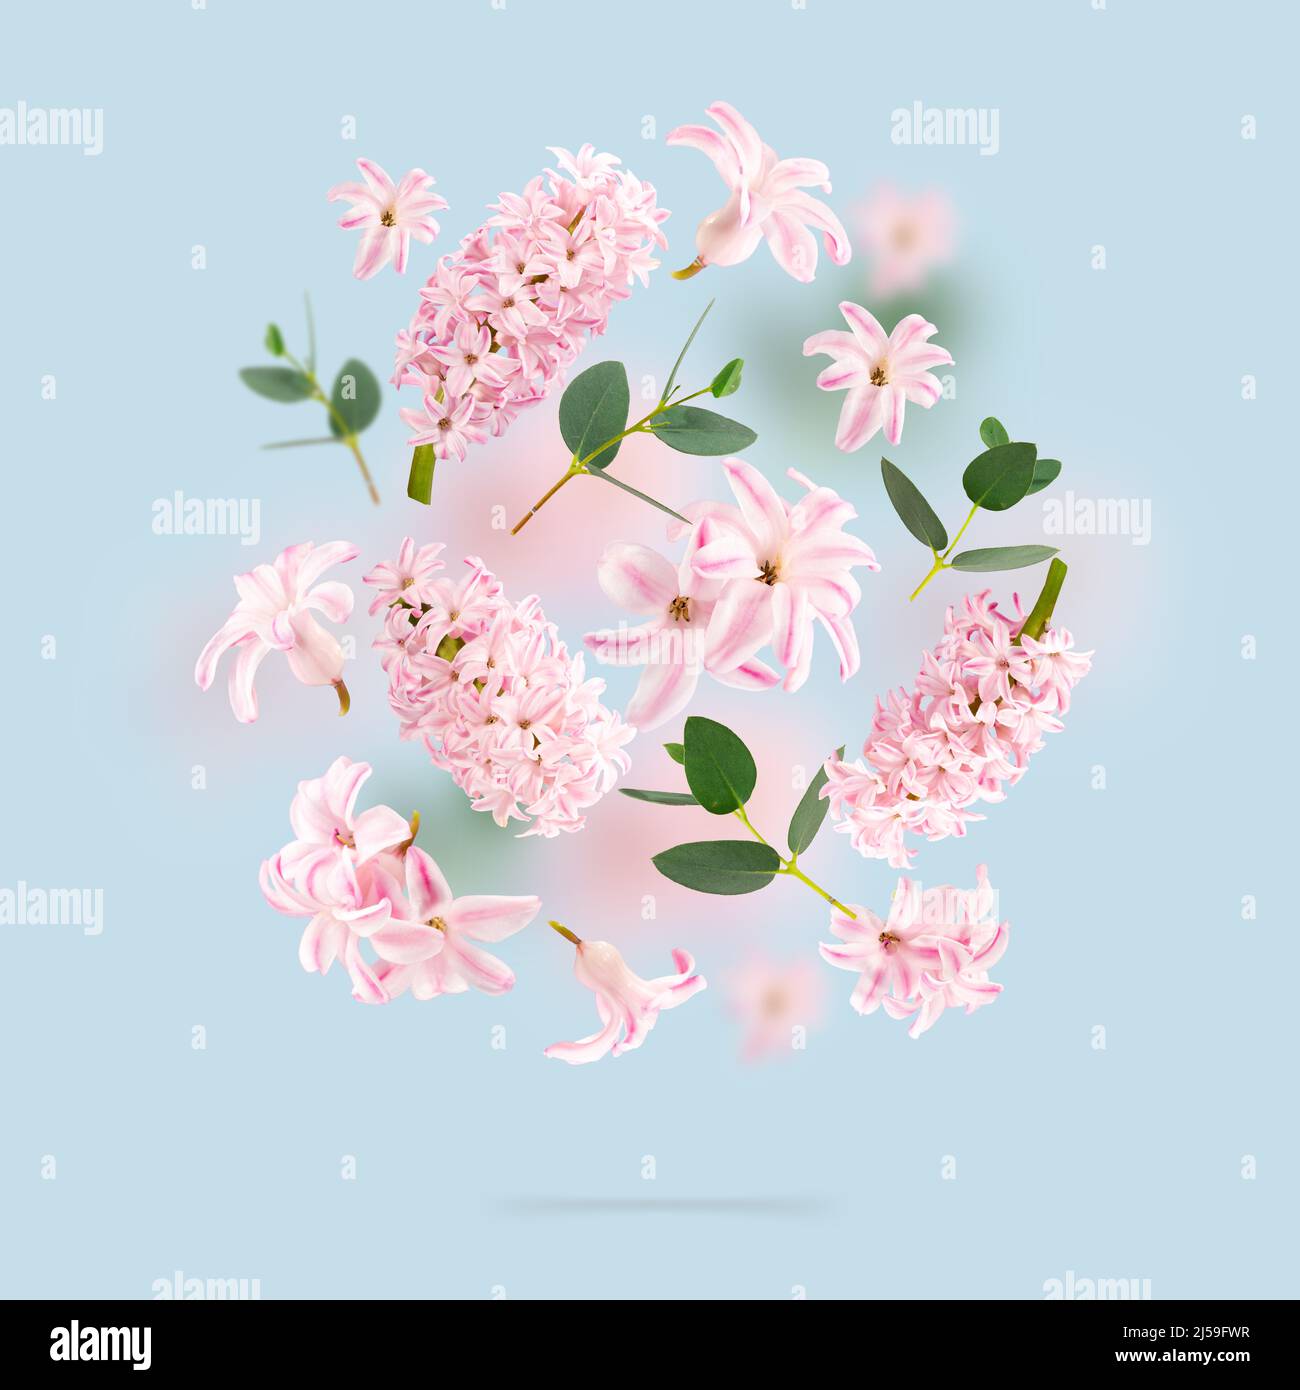 A picture with rose hyacinth flowers and green leaves flying in the air on spun sugar background. Levitation concept. Floating petals on a light blue. Stock Photo